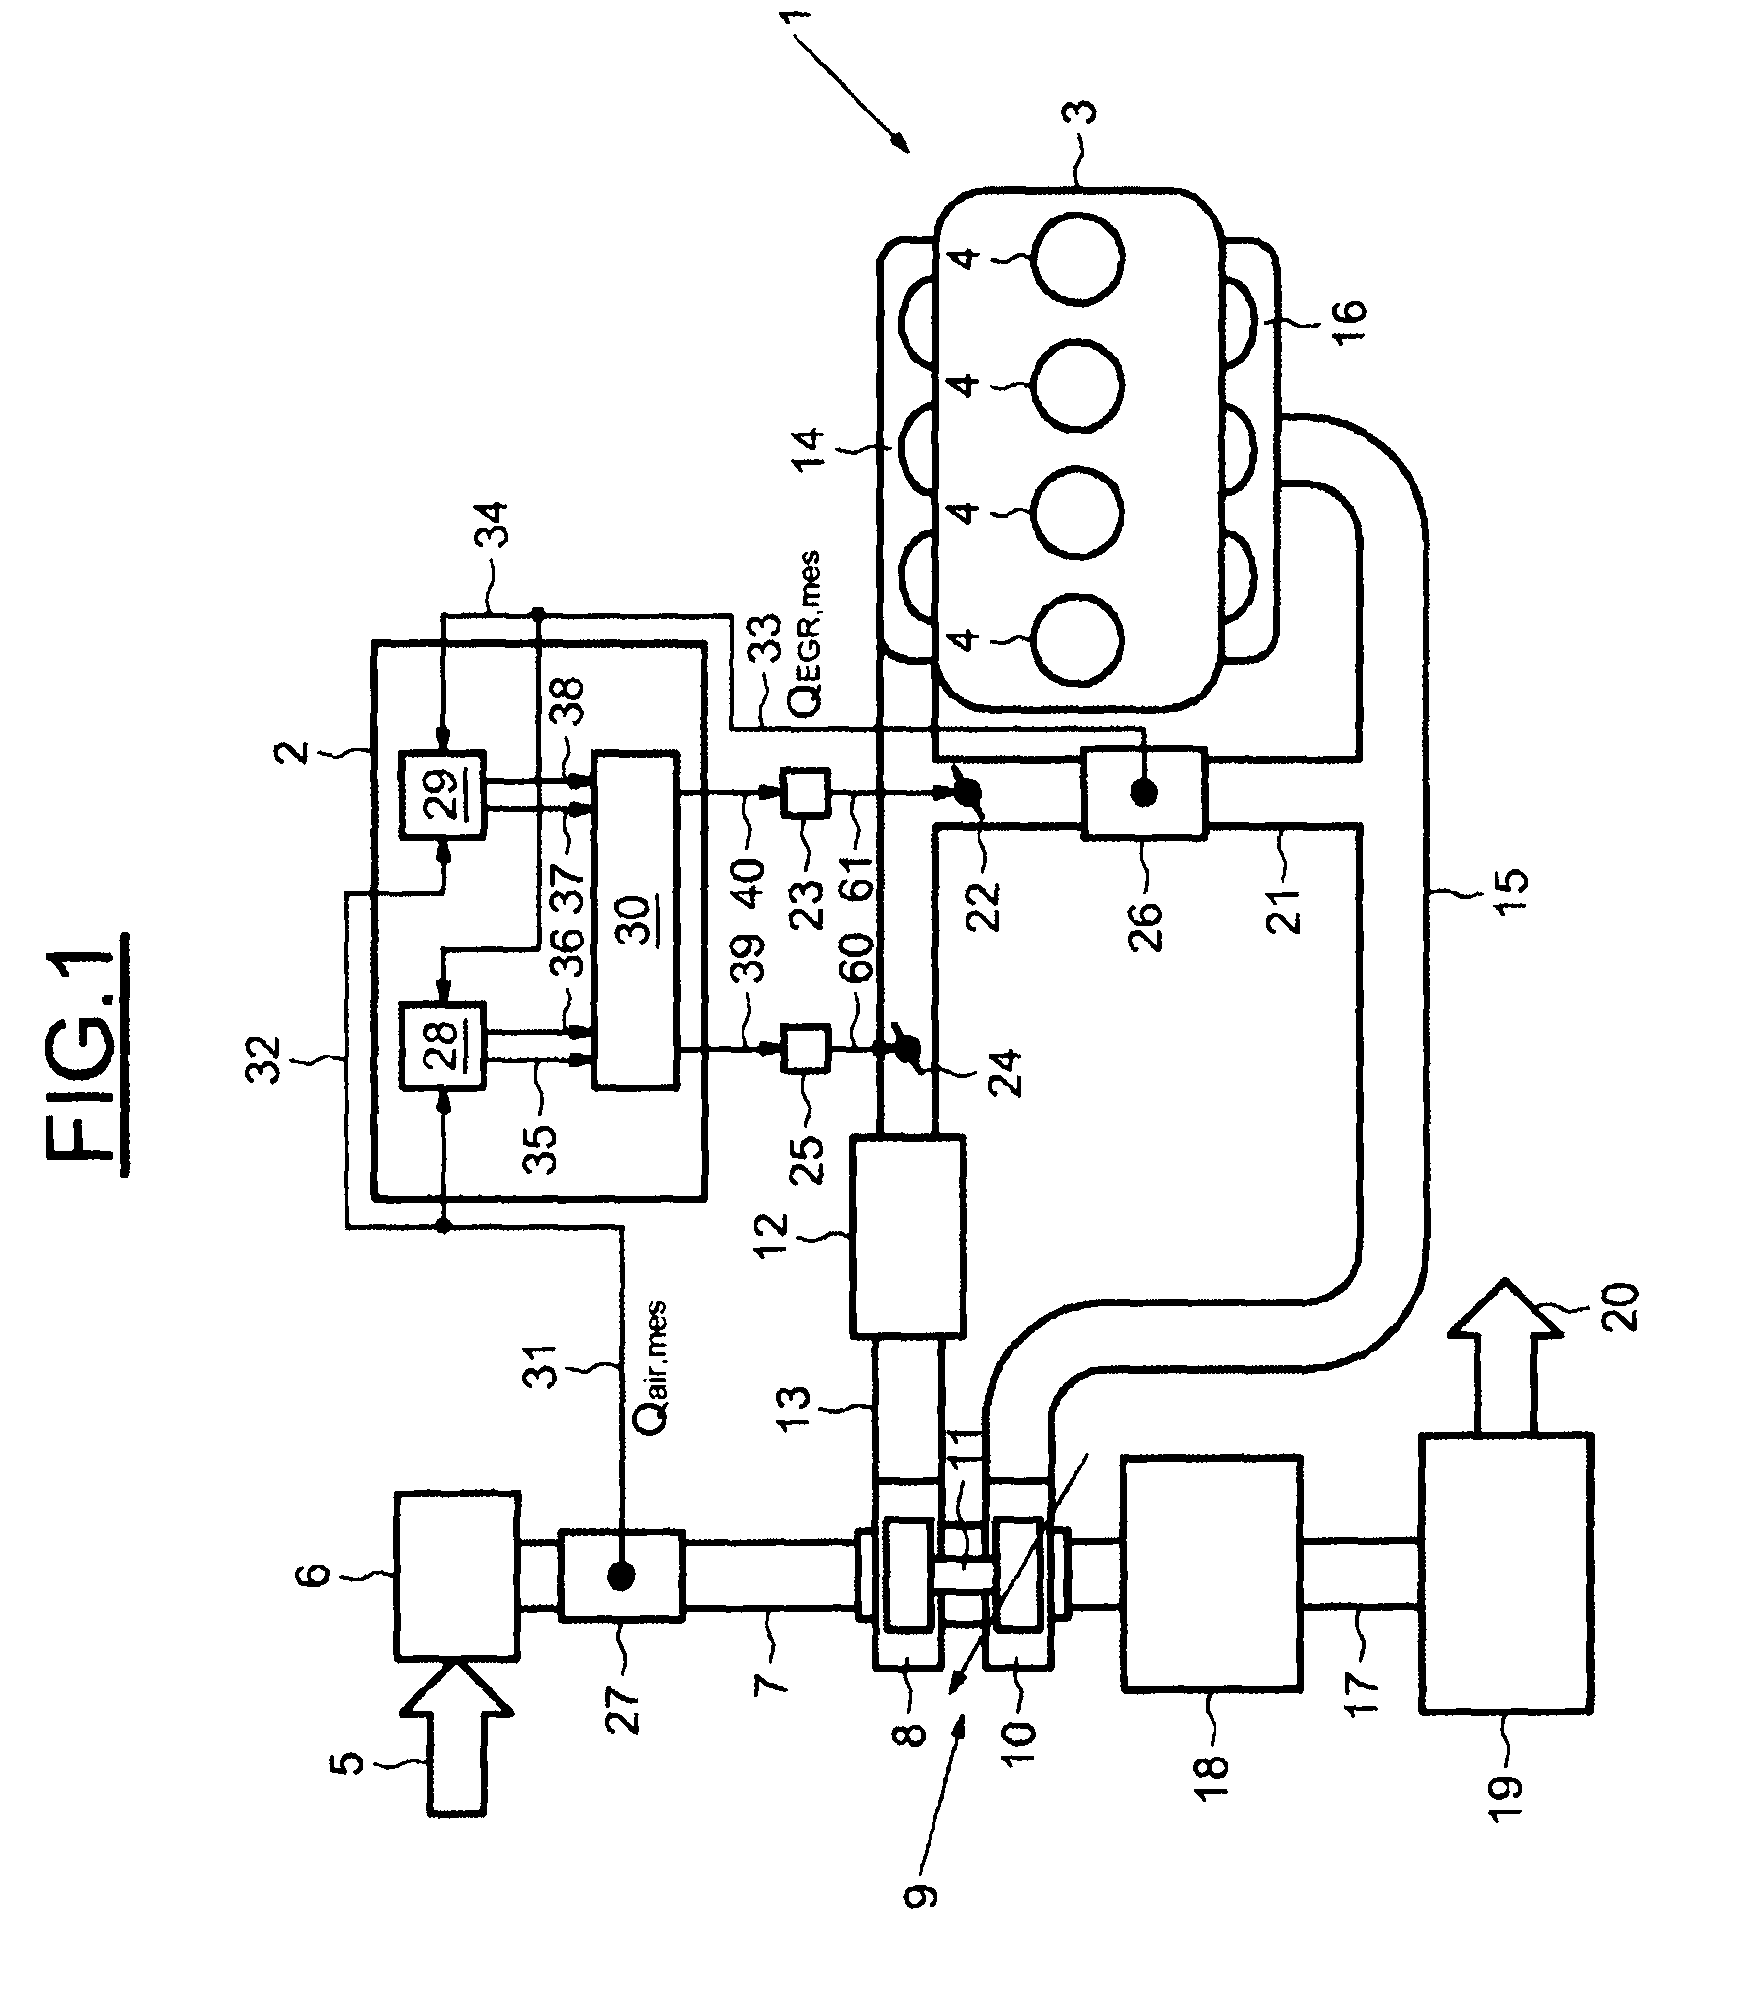 System and method for controlling the fresh air and burnt gases introduced into an internal combustion engine during transitions between the purging of a nitrogen oxides trap and the regeneration of a particulate filter